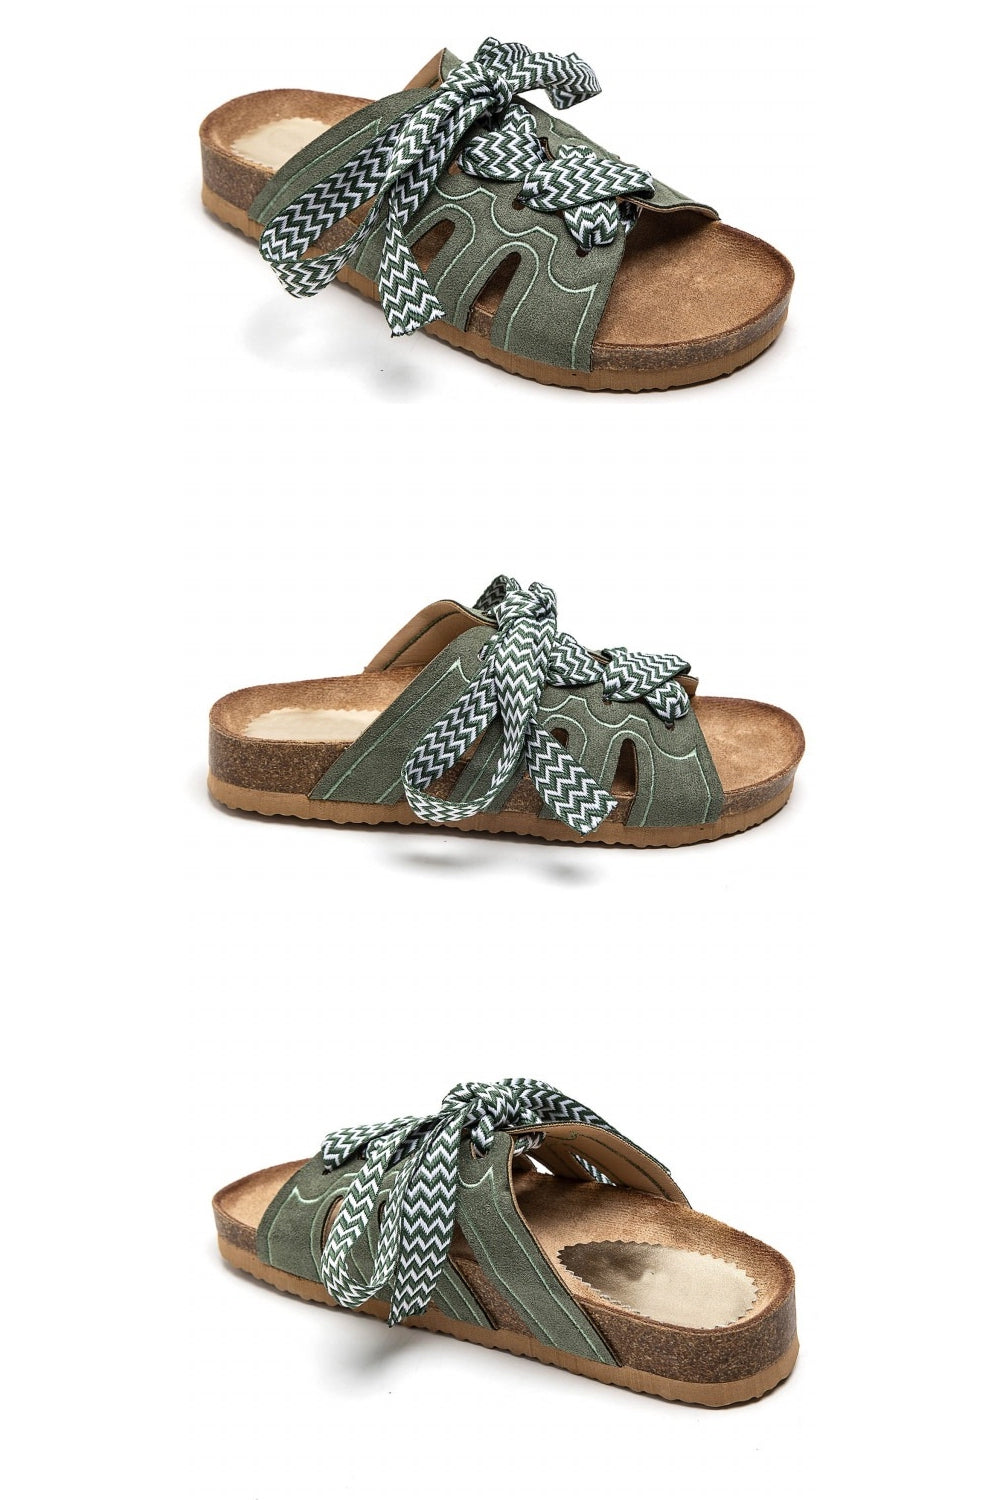 GREEN LACE UP FLAT SOFT FOOTBED SUMMER SANDALS